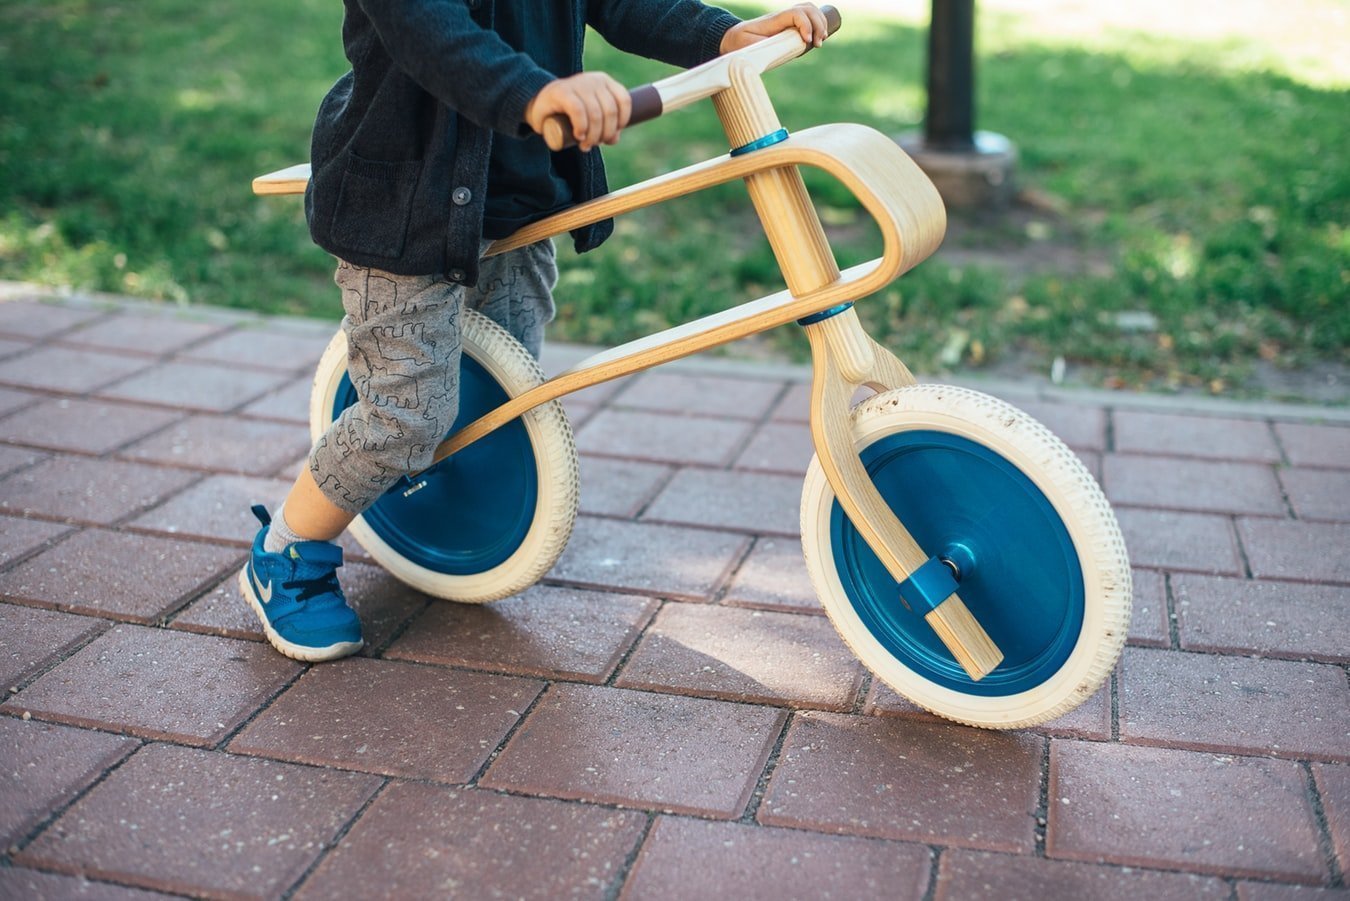 best push bikes for toddlers